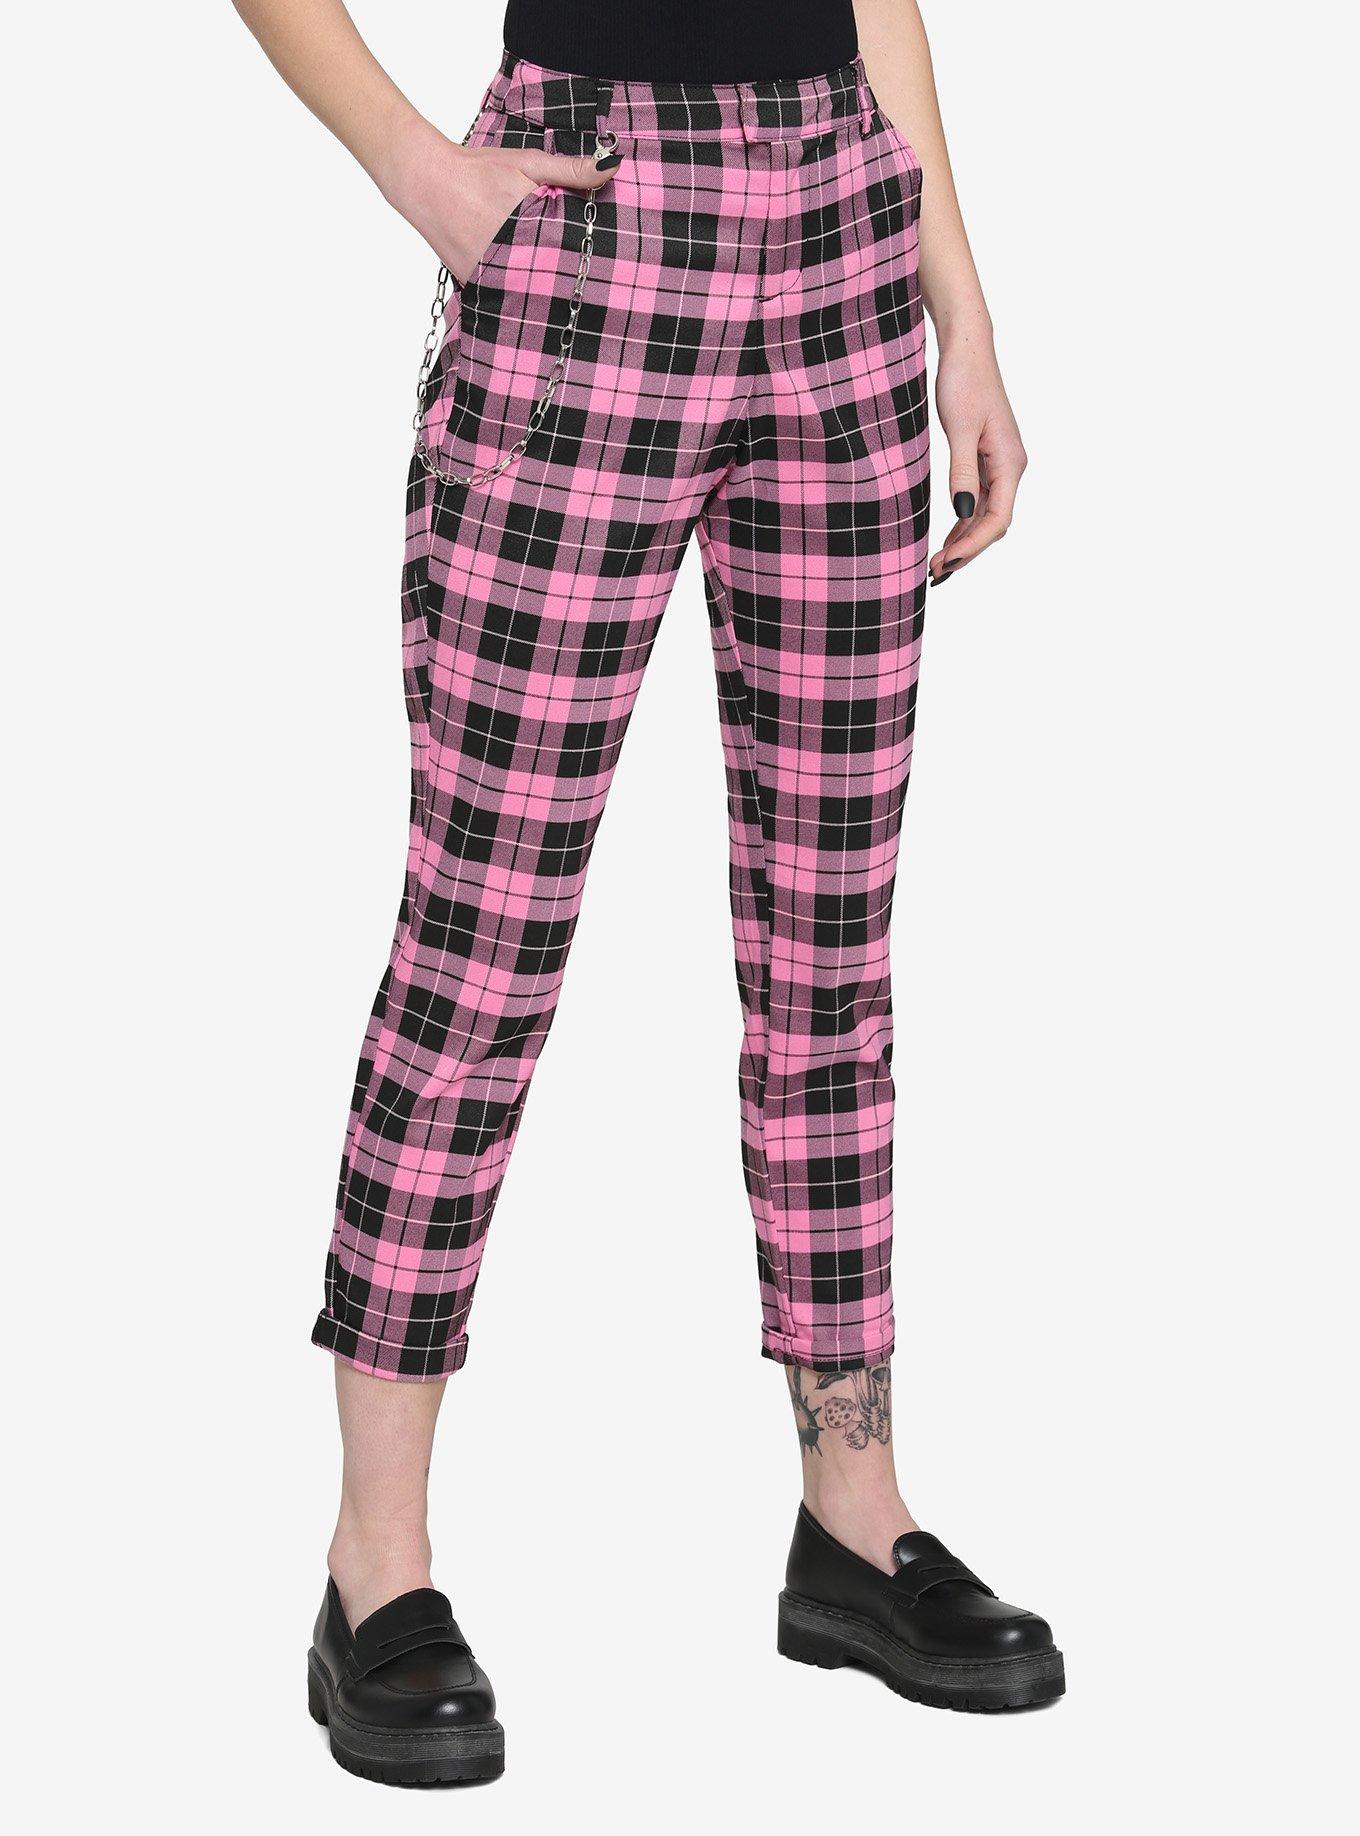 Hot Topic Plaid Pants Black White Chain Retro Y2k Academia Women's Size XS  - $20 - From Den